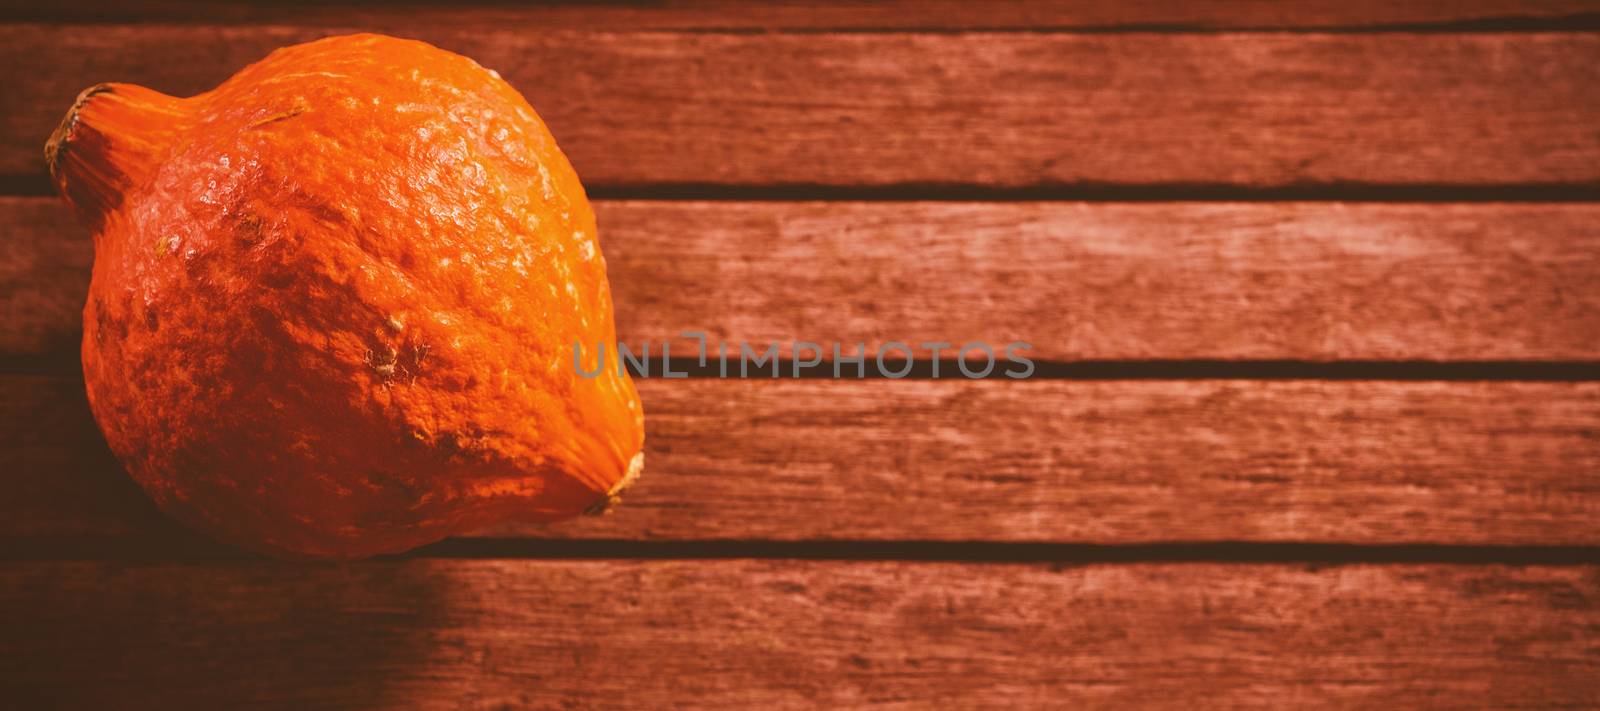 Squash on wooden table during Halloween by Wavebreakmedia